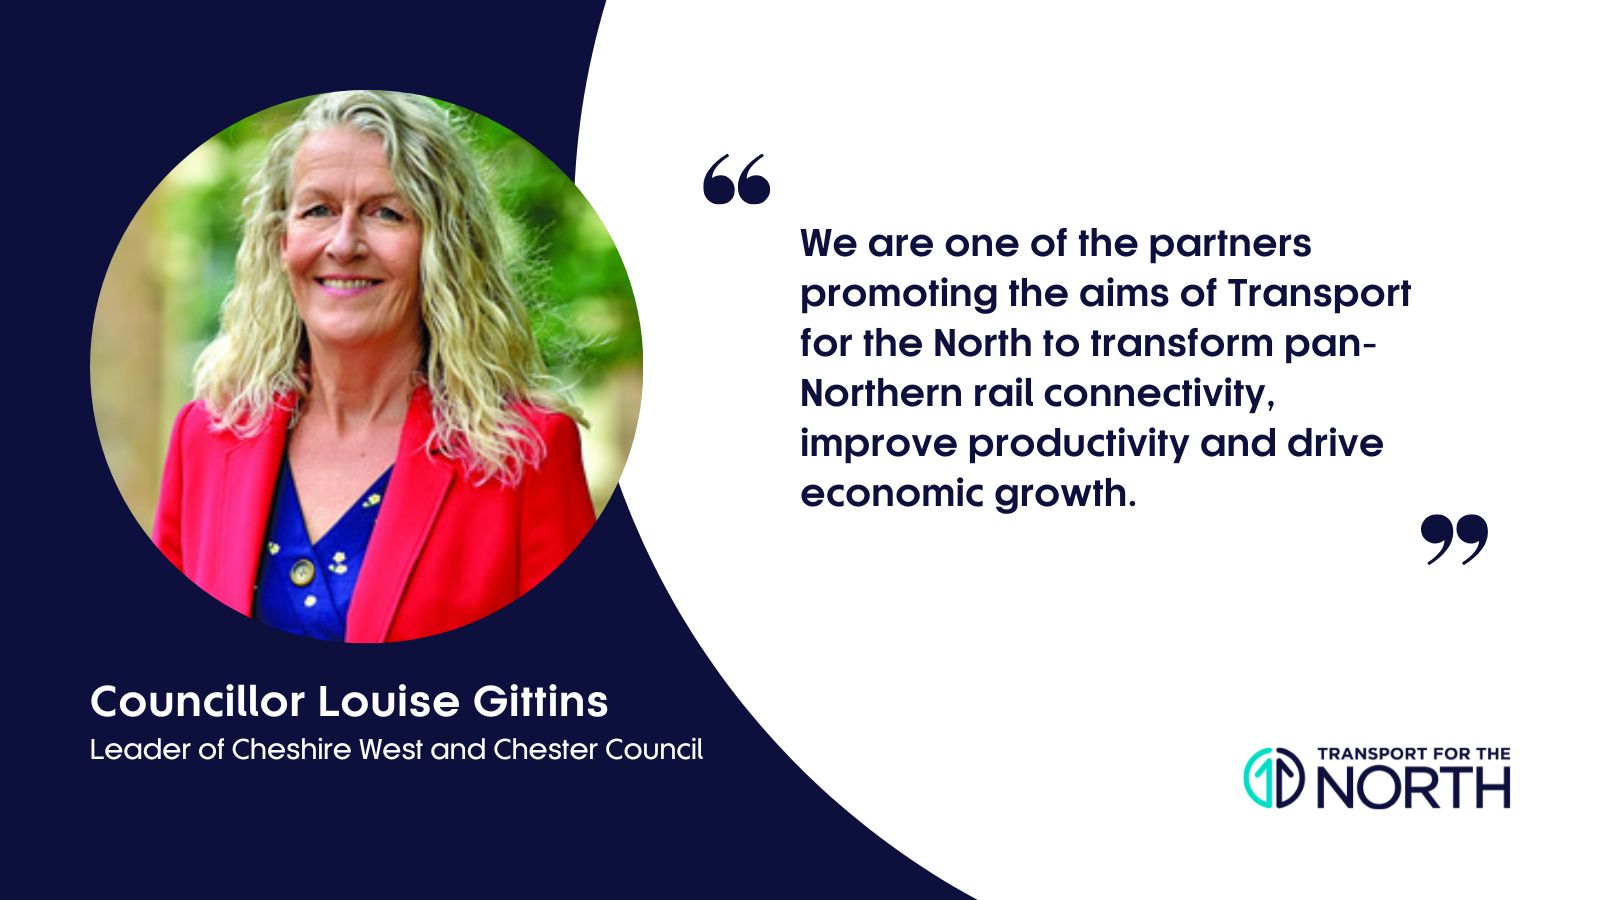 Councillor Louise Gittins, Leader of Cheshire West and Chester Council comments on TfN visit to the region